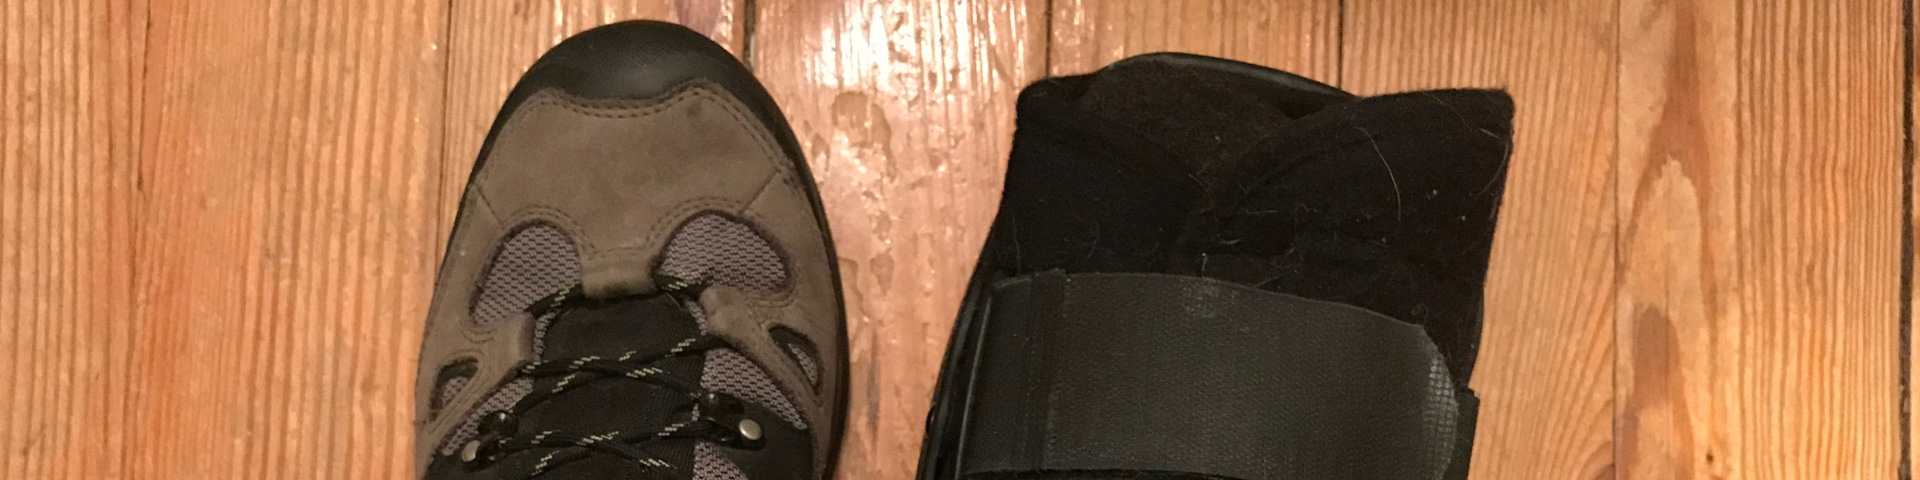 A picture of my left foot (wearing a hiking boot) and my right (wearing a structural boot)